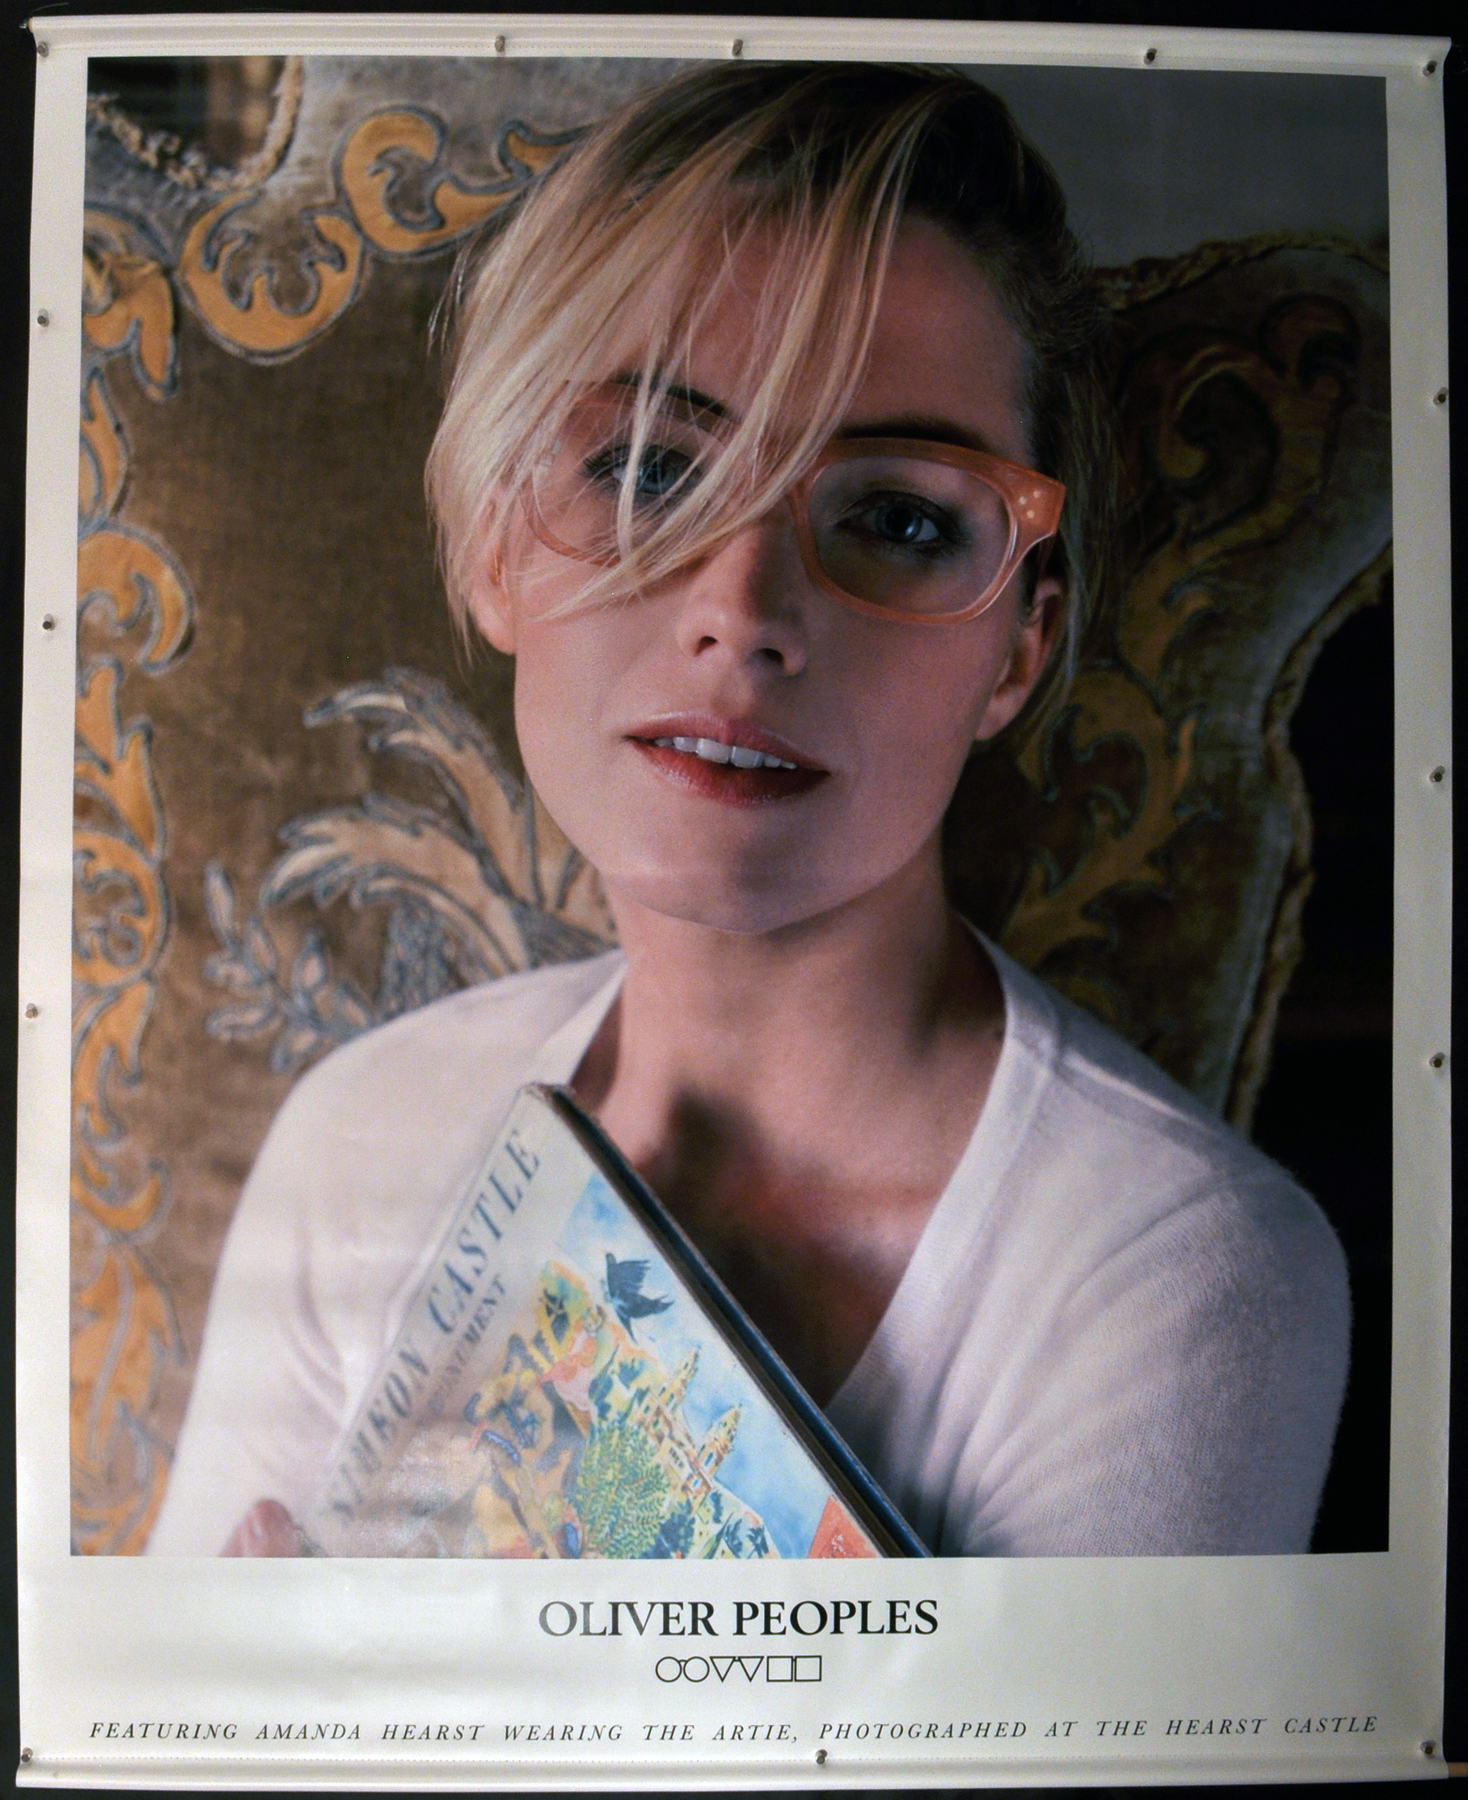 Oliver Peoples "The Artie" Featuring Amanda Hearst Eyewear Advertising Poster